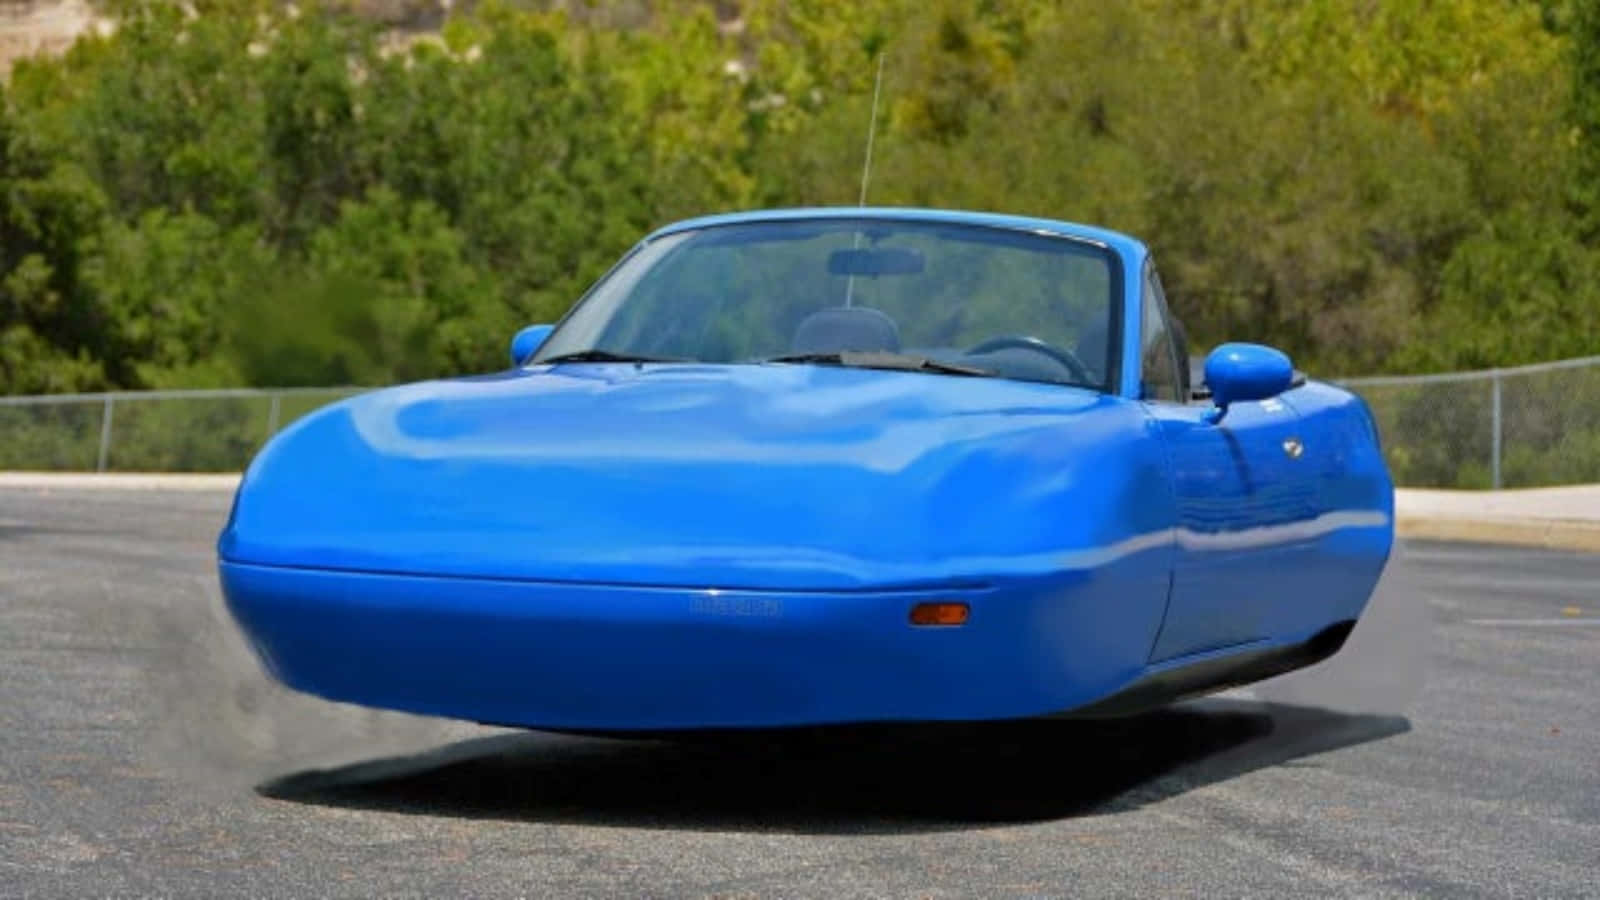 A Blue Car With A Motor On It